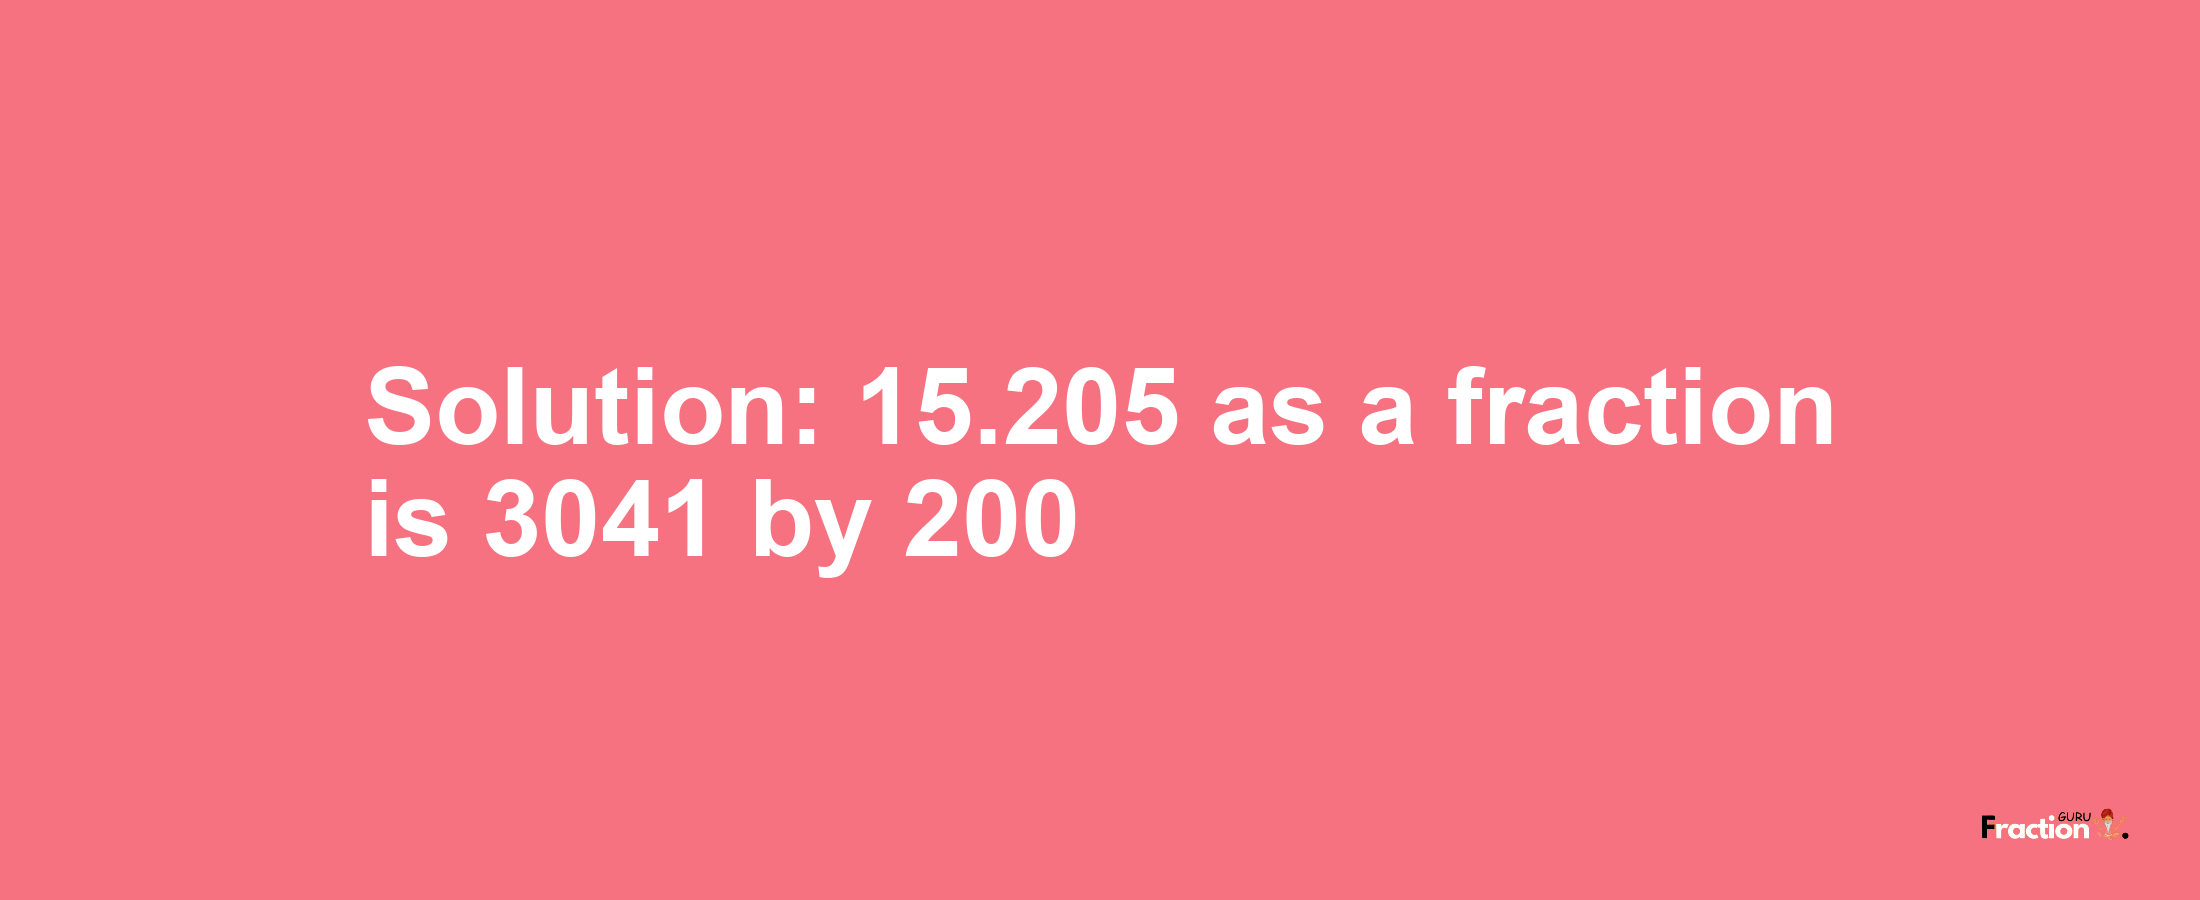 Solution:15.205 as a fraction is 3041/200